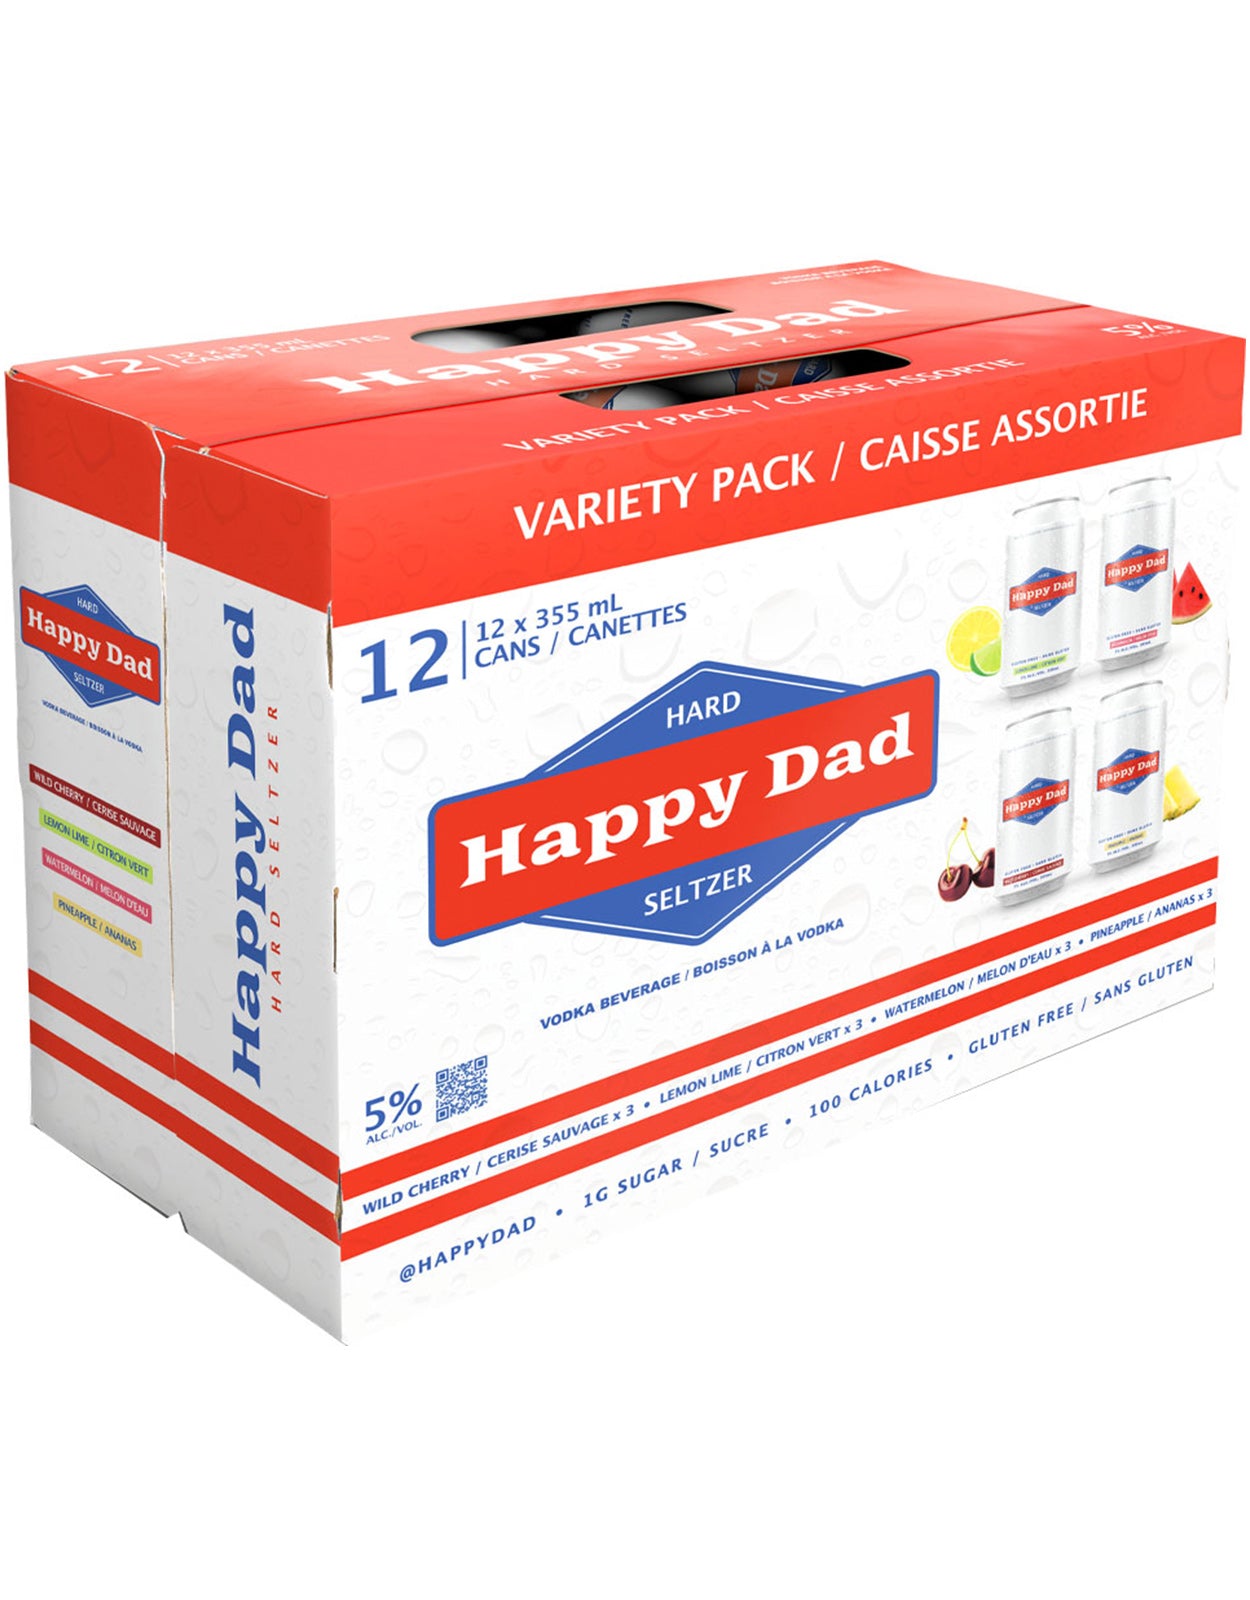 Happy Dad Hard Seltzer Variety Pack 355 ml - 12 Cans